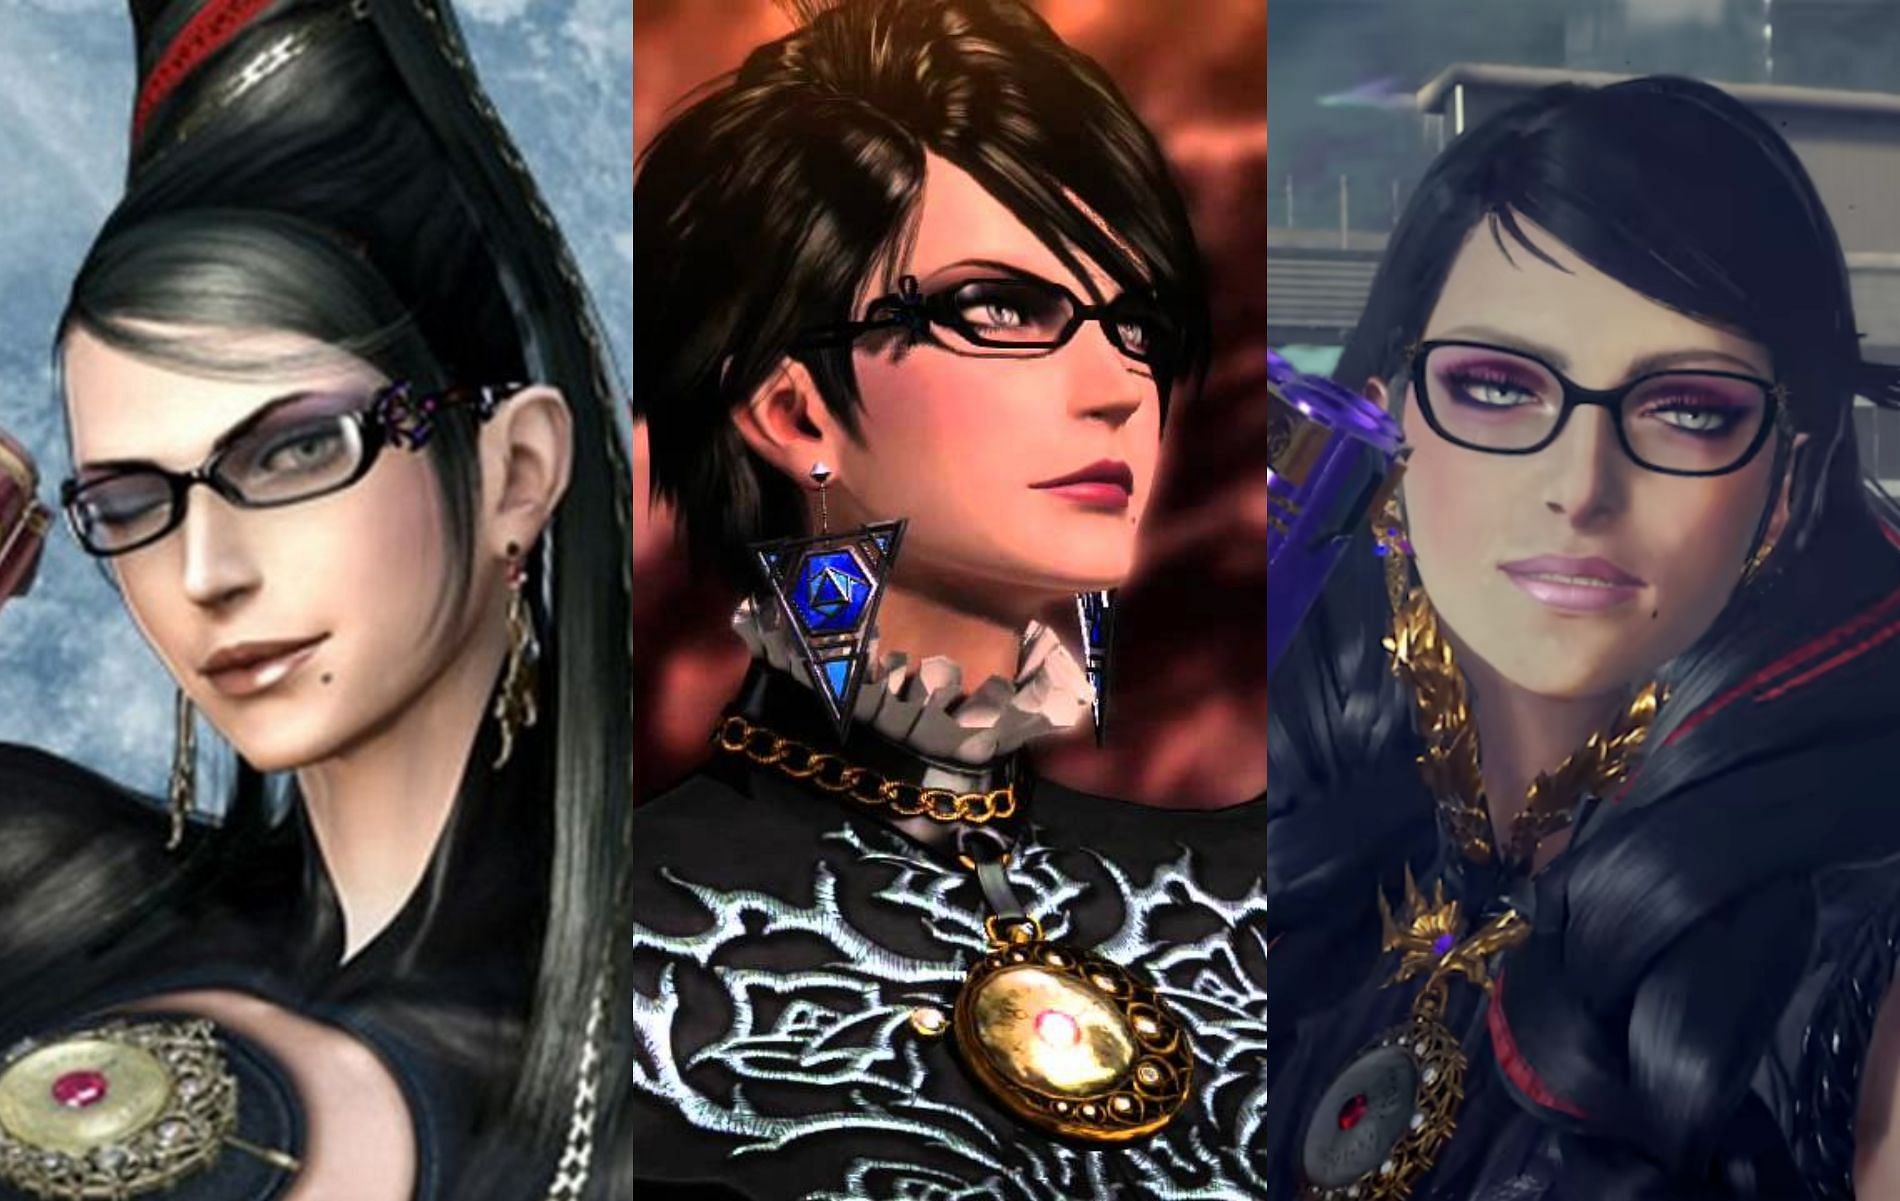 Bayonetta has come a long way since the series